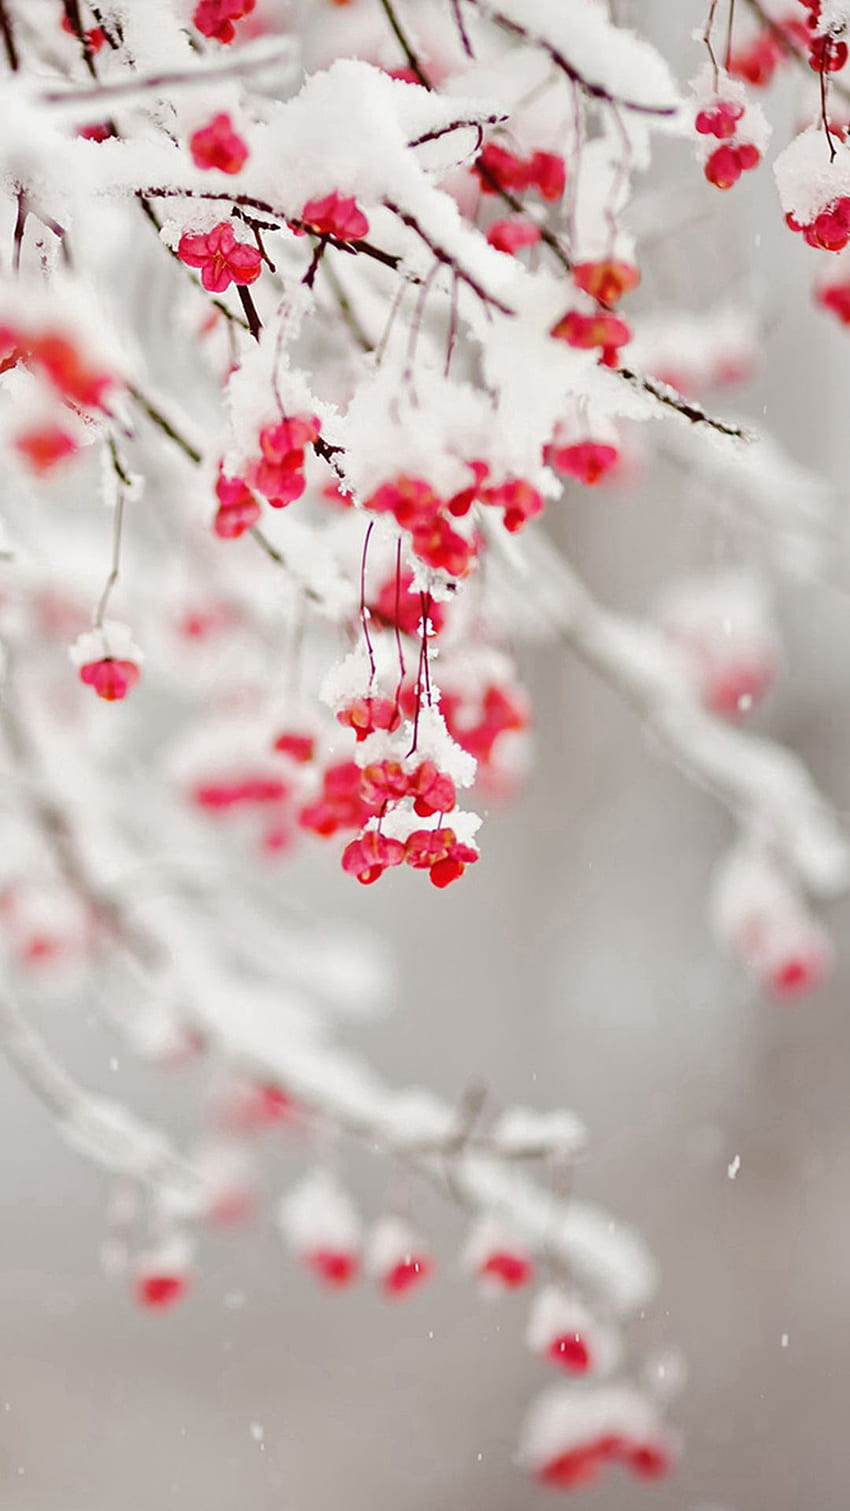 Winter Snowy Pure Icy Fruit Branch iPhone 6 . iPhone , iPad . iPhone winter, Winter , Winter background, Pinterest Winter HD phone wallpaper